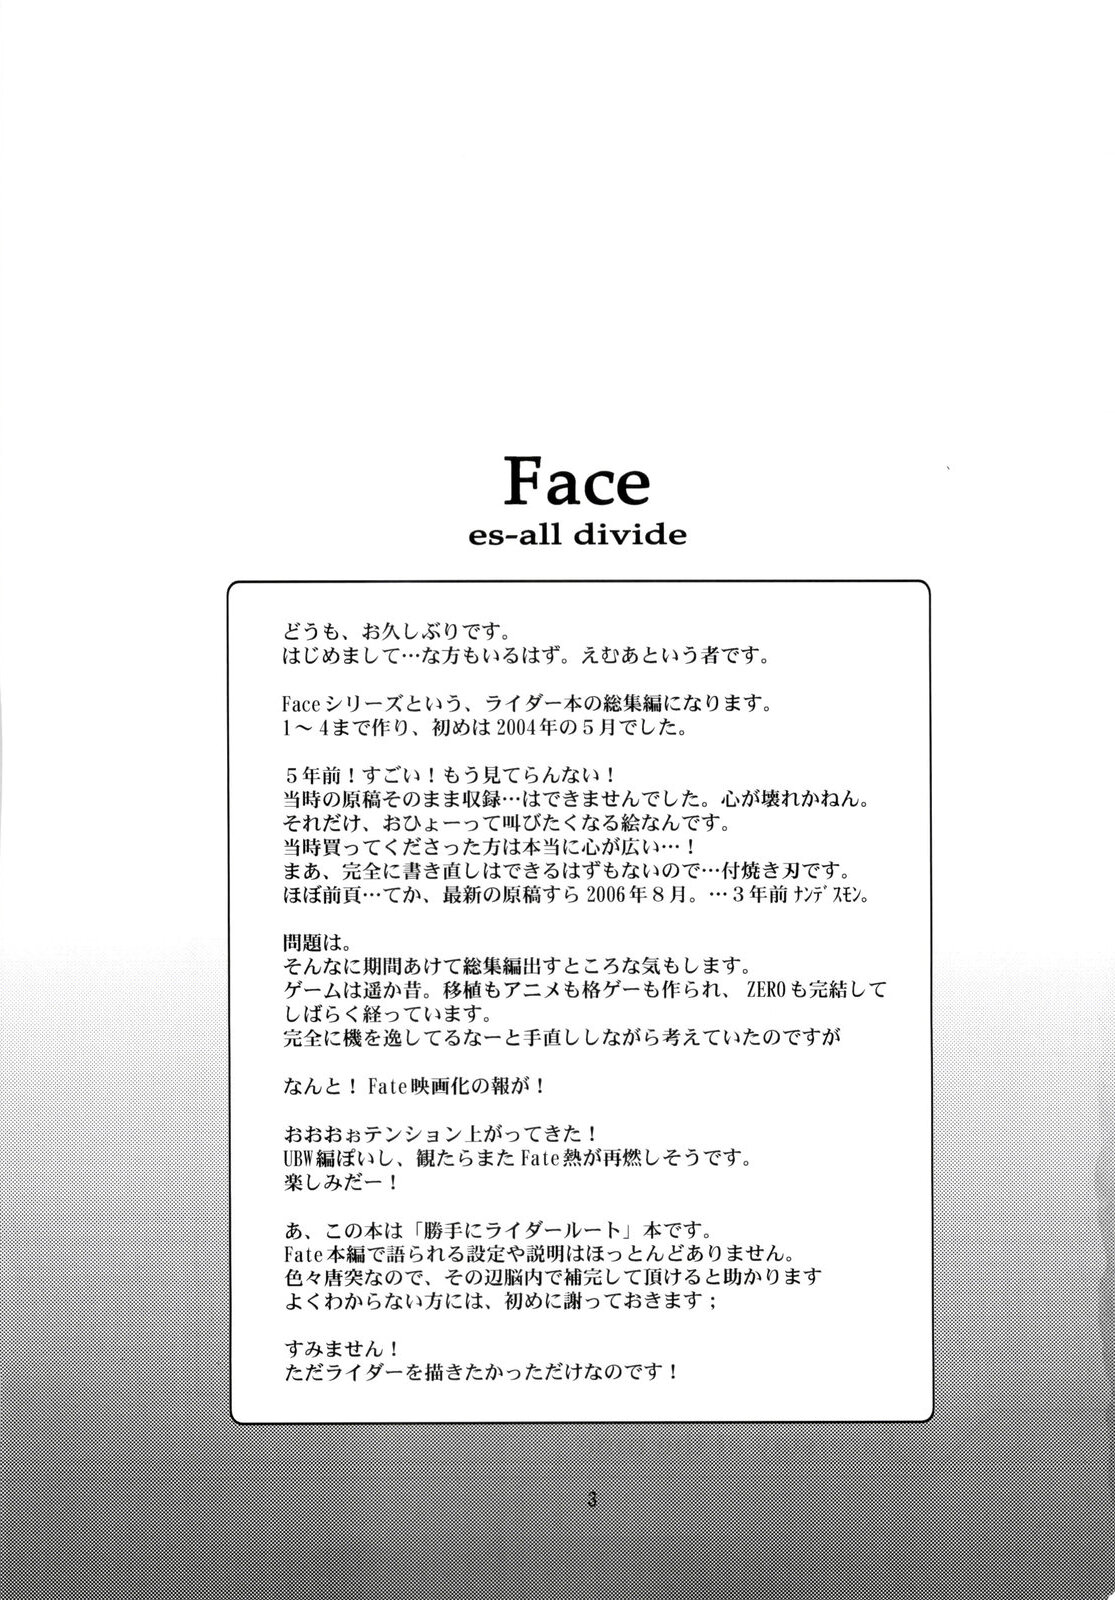 (C76) [くろーヴァー会 (えむあ)] Face/stay at the time (Face es-all divide) (Fate/stay night) [英訳]